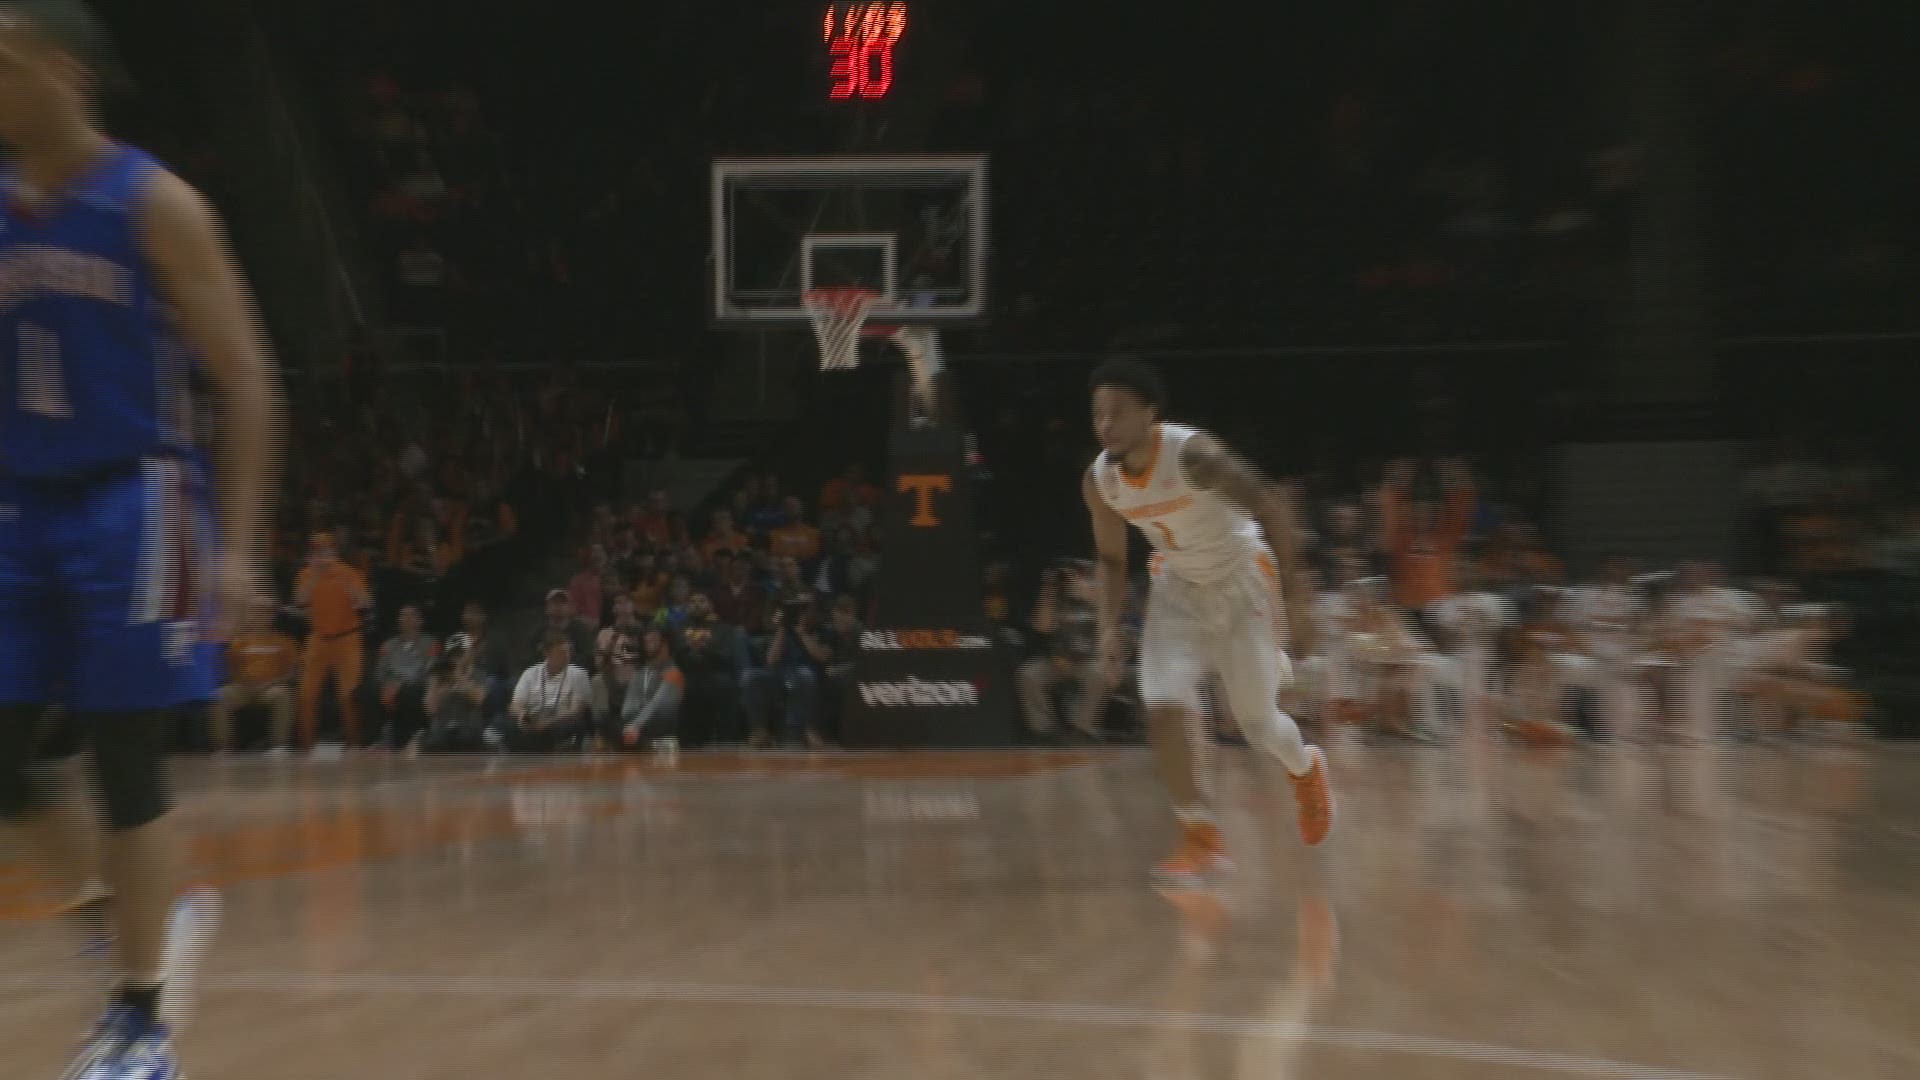 Highlights from Tennessee's 90-50 win over Presbyterian plus a fun story from Rick Barnes about recruiting Knoxville native Jordan Bowden, who scored 21 points against the Blue Hose.